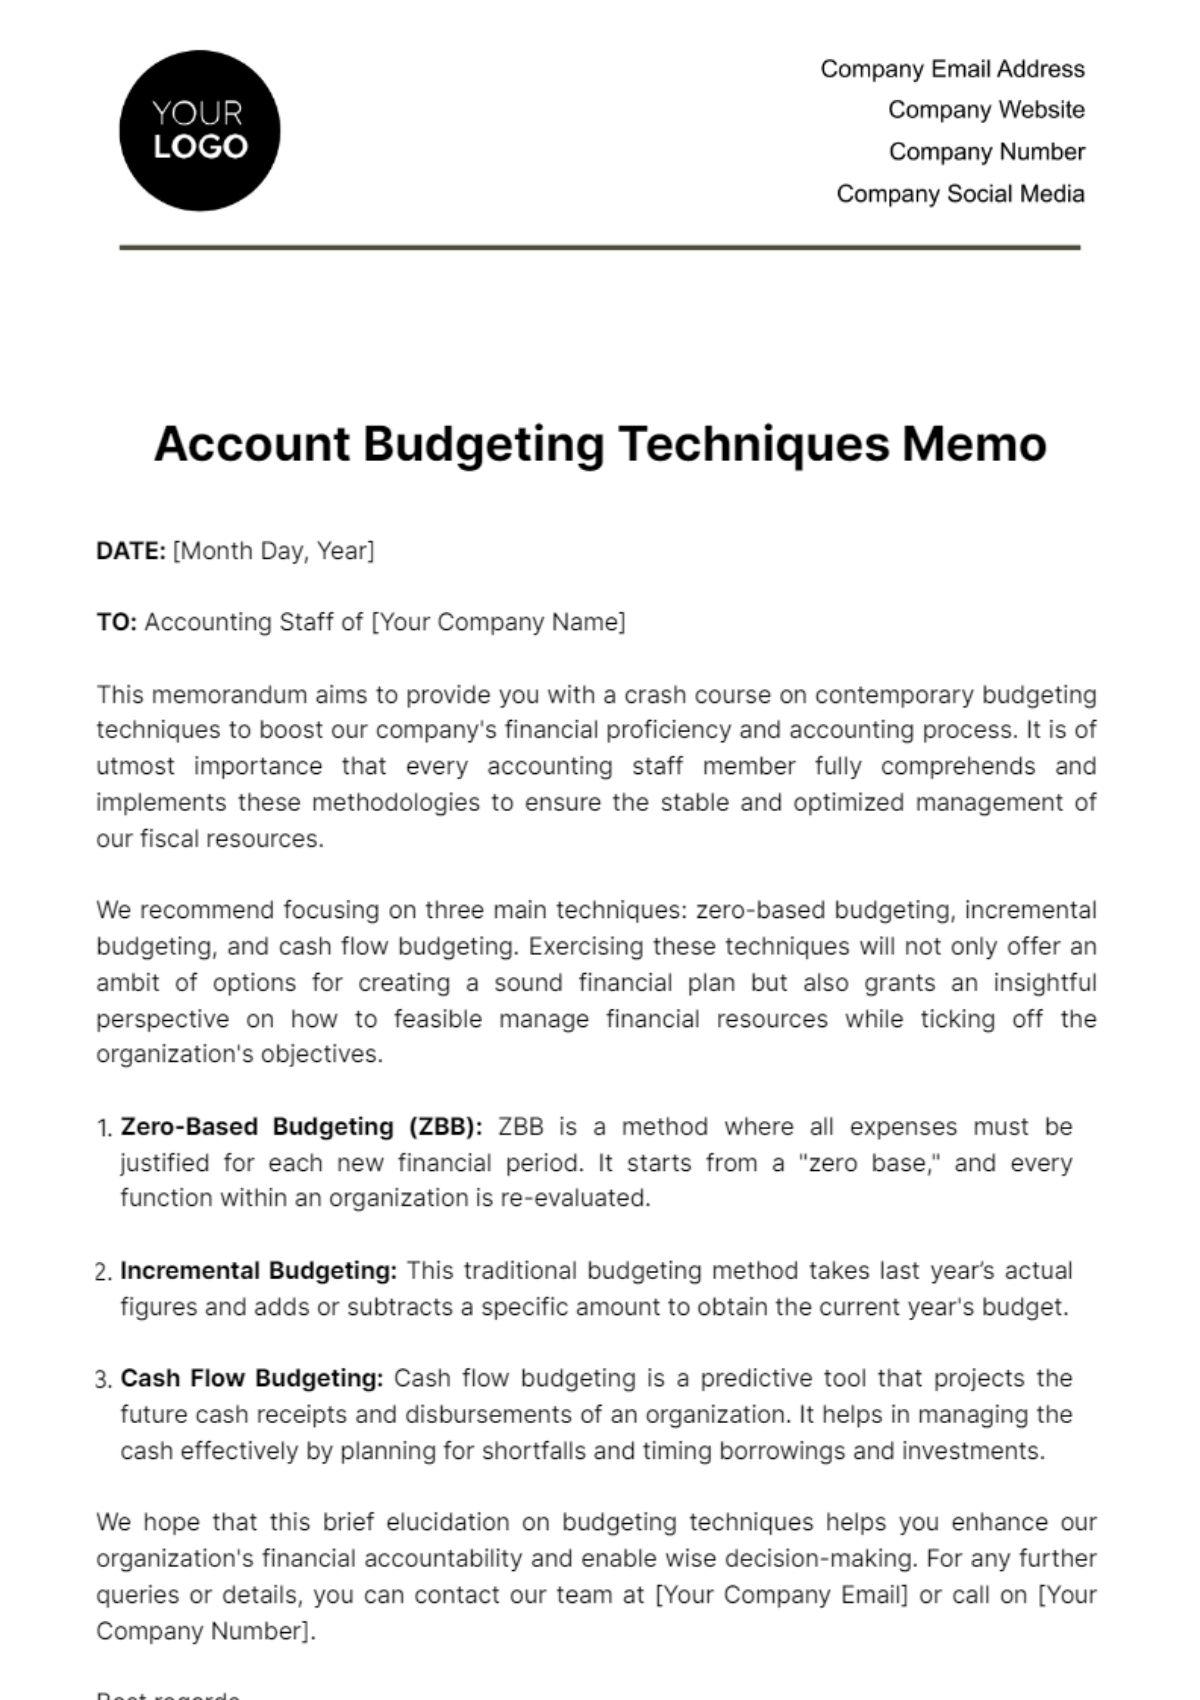 Free Account Budgeting Techniques Memo Template